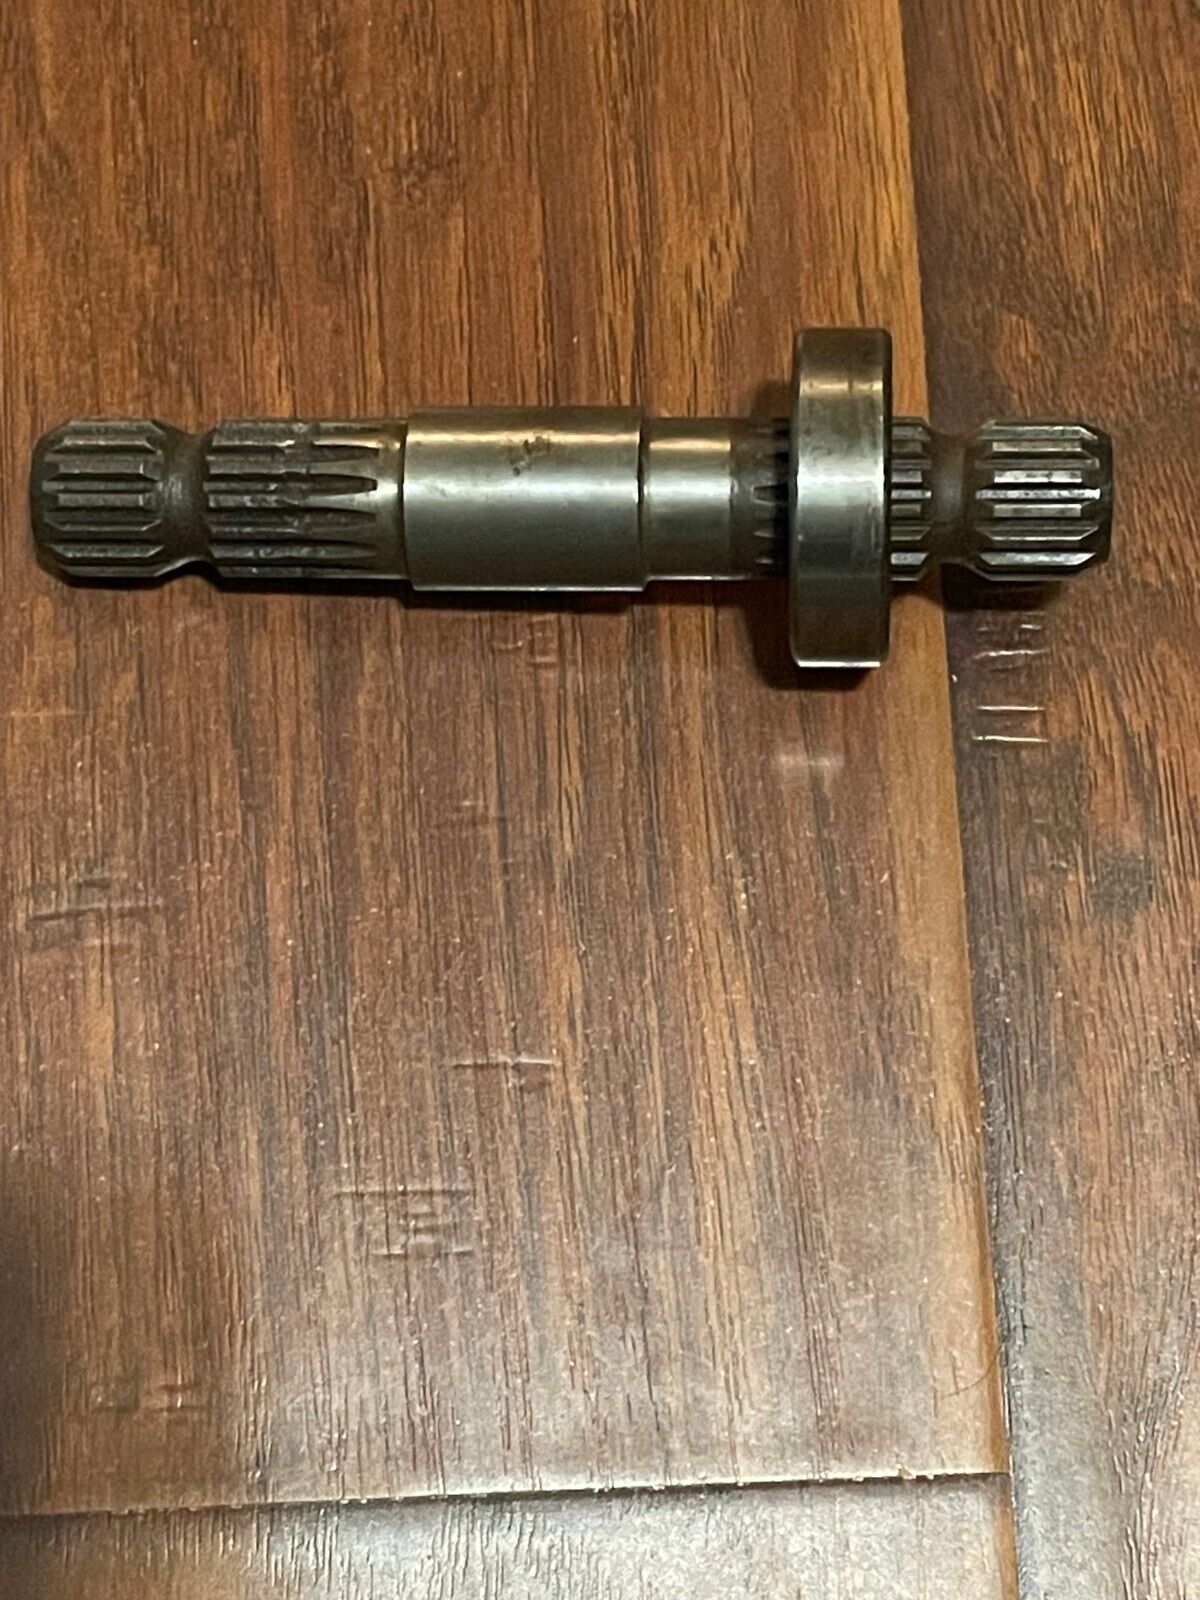 Gravely Front PTO Axle Shaft